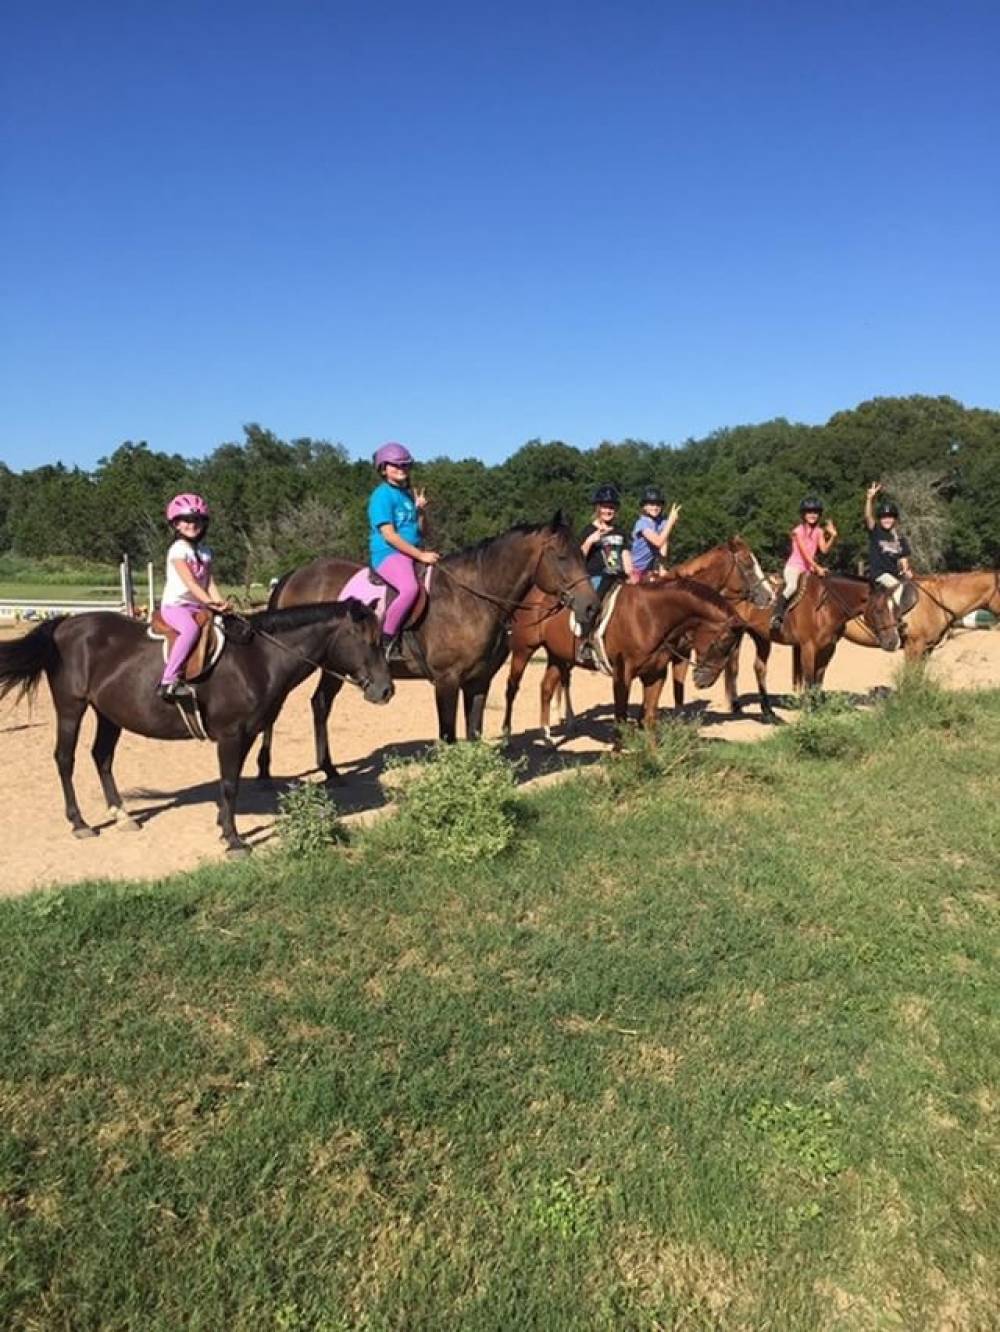 TOP TEXAS AQUATICS CAMP: Hunters Chase Farms Inc. is a Top Aquatics Summer Camp located in Wimberley Texas offering many fun and enriching Aquatics and other camp programs. Hunters Chase Farms Inc. also offers CIT/LIT and/or Teen Leadership Opportunities, too.